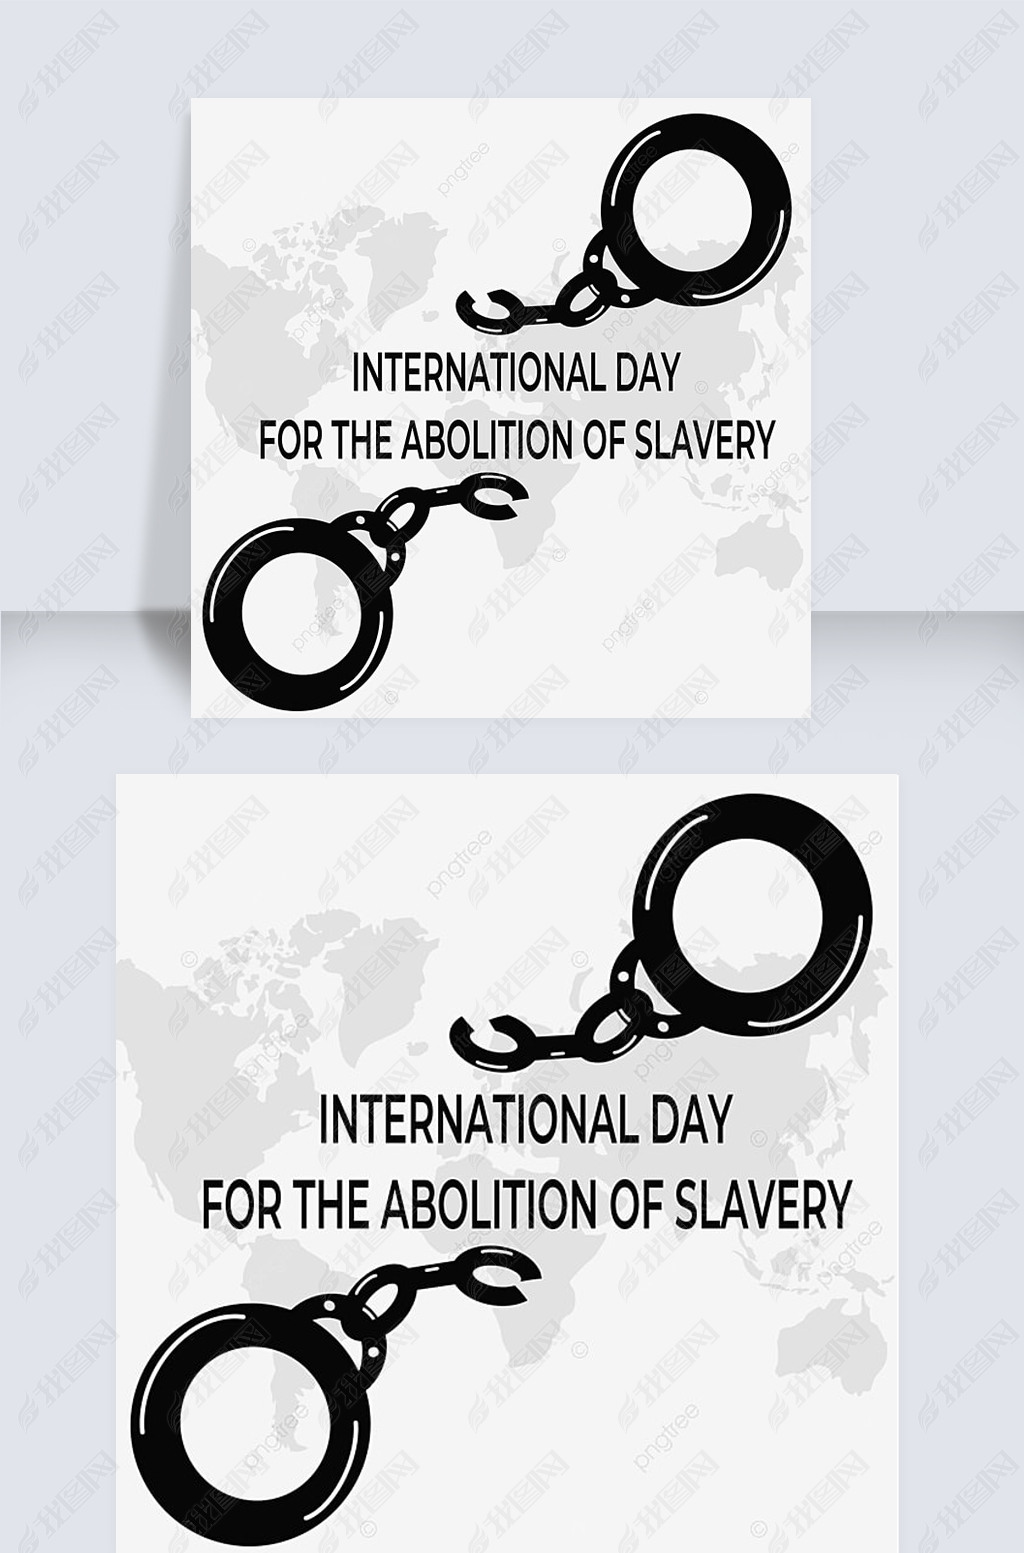 international day for the abolition of sleryֻ򳶶